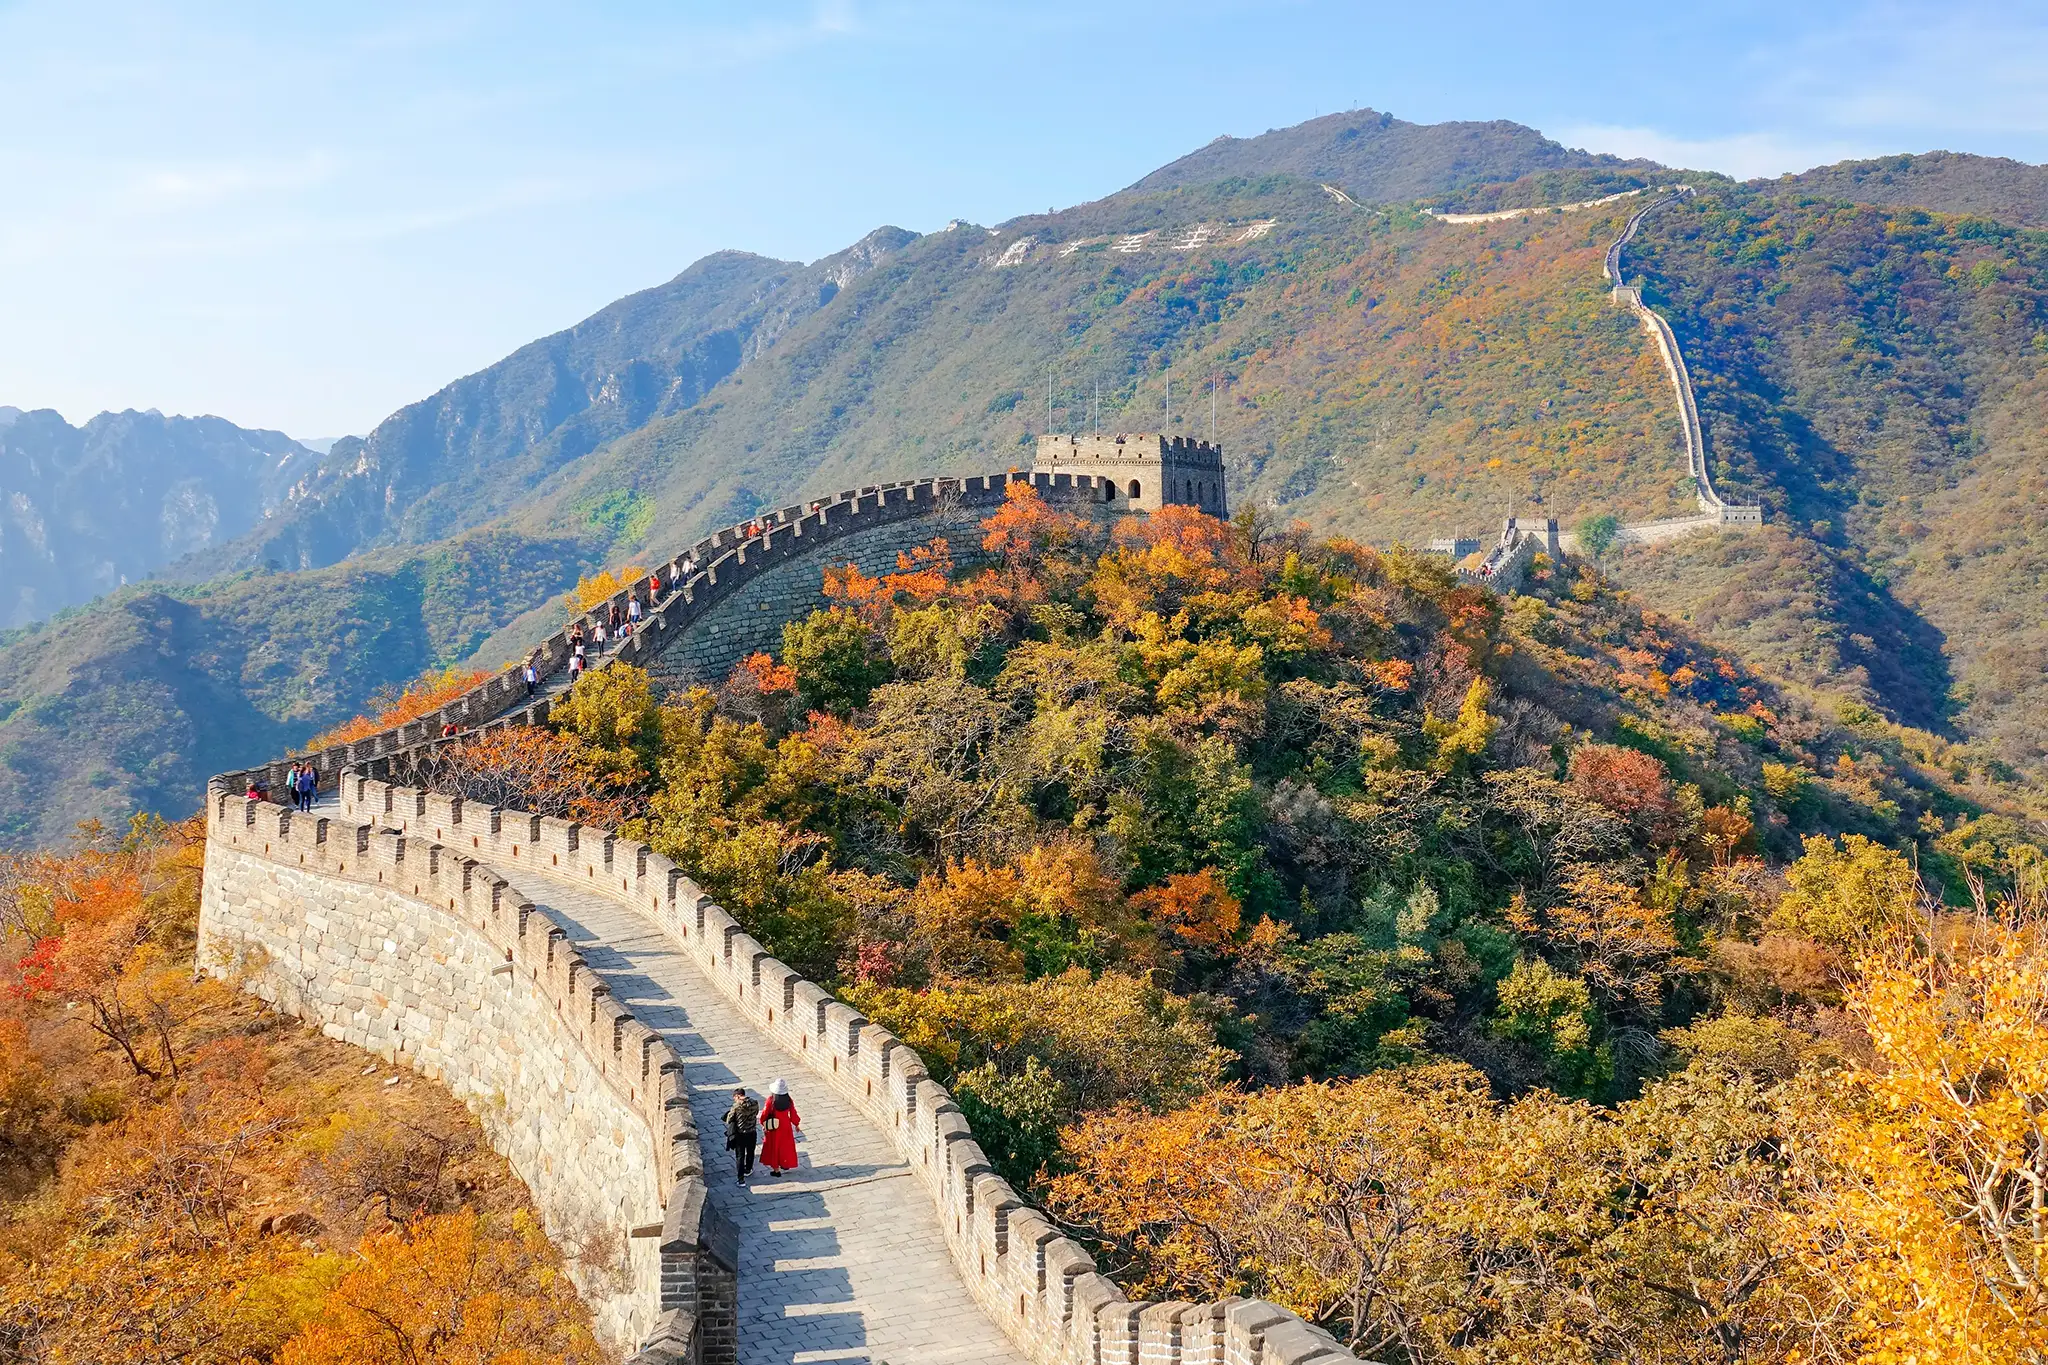 Two unrecognisable tourists walk along the walkway atop the Great Wall of China.